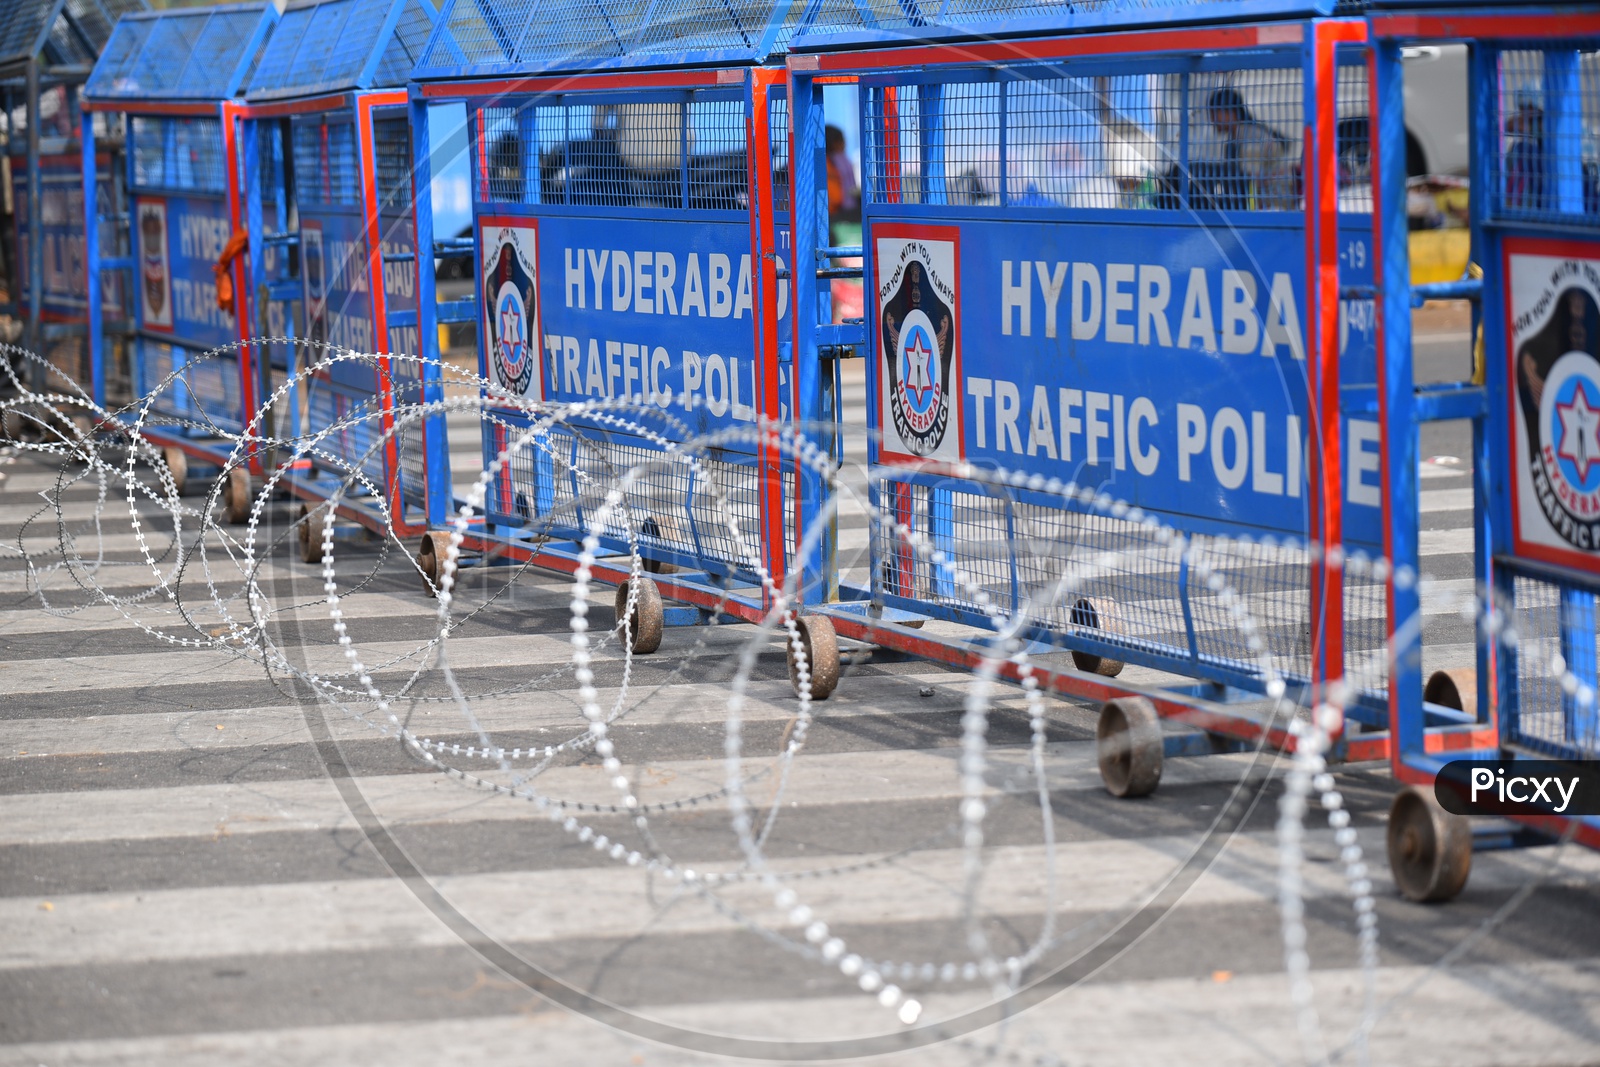 Road Closures With Barricades and Metal Fence At Lumbini Park , Teluguthalli Flyover And Roads Lead To  Tank bund  in the Wake Of TSRTC JAC , Congress And Other Political Parties Called For a Million March